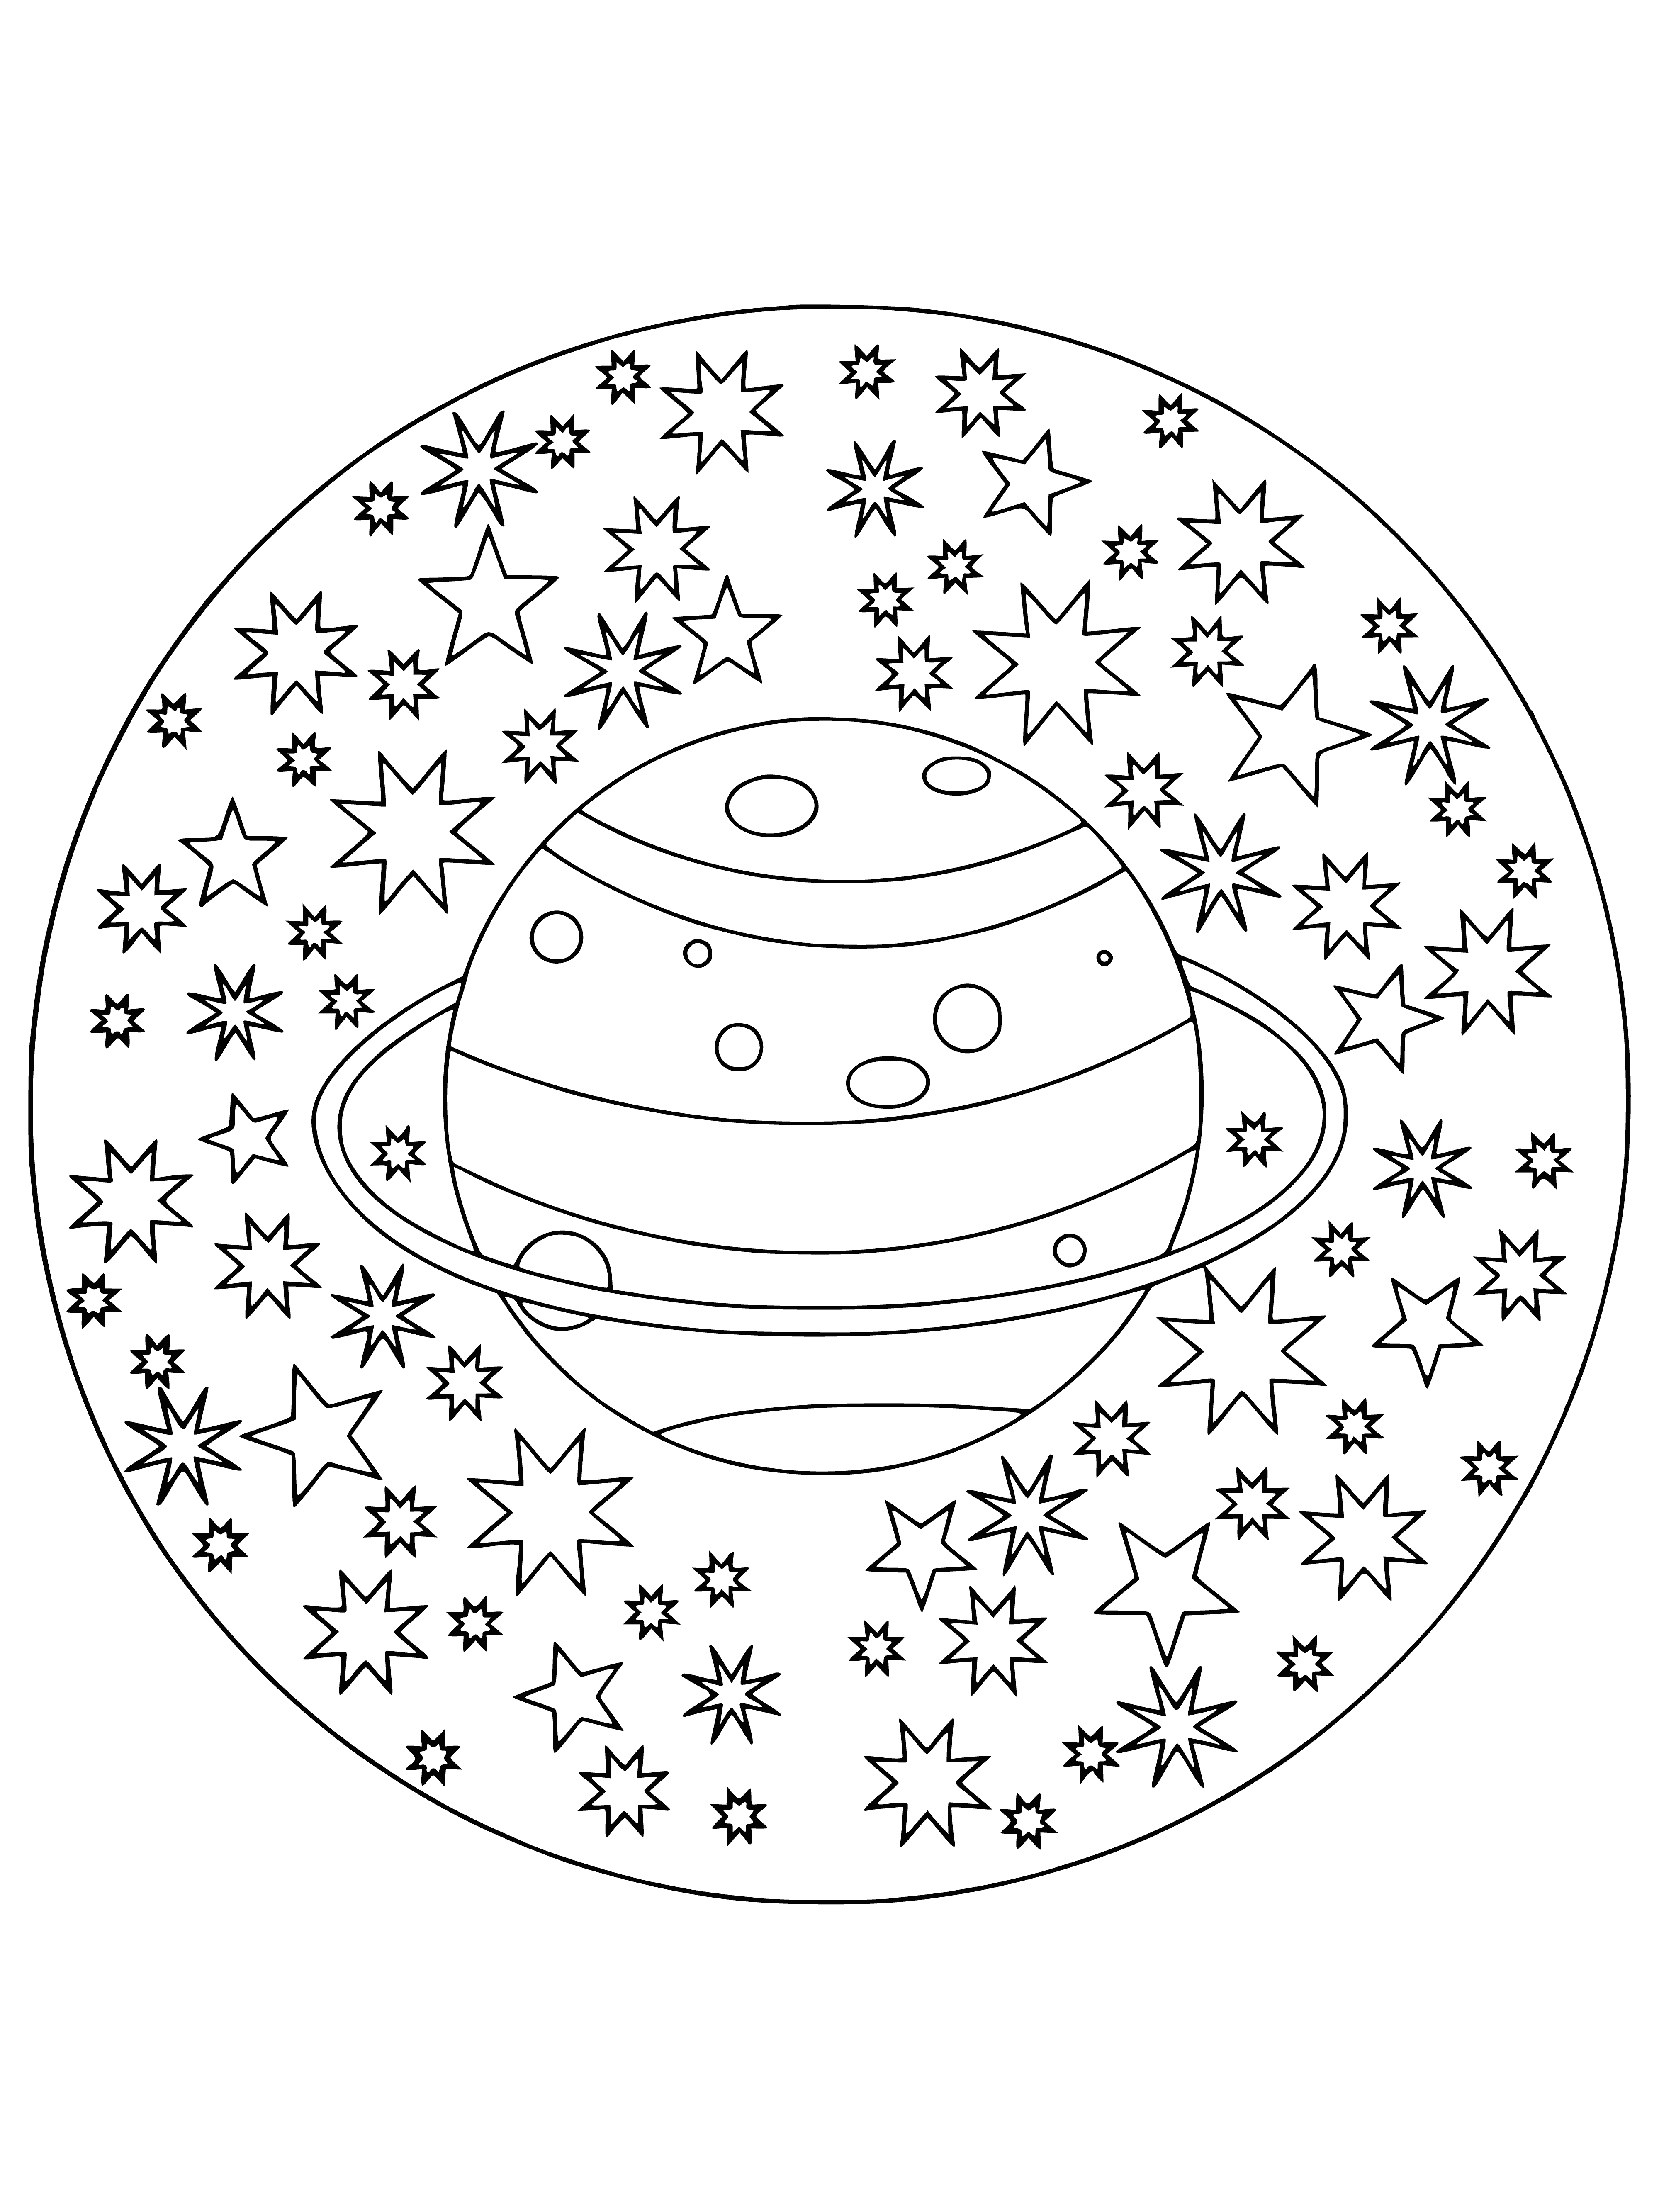 coloring page: Download a black & white Saturn coloring page & relax as you fill in its circles, spirals & geometric shapes in the star-studded background.